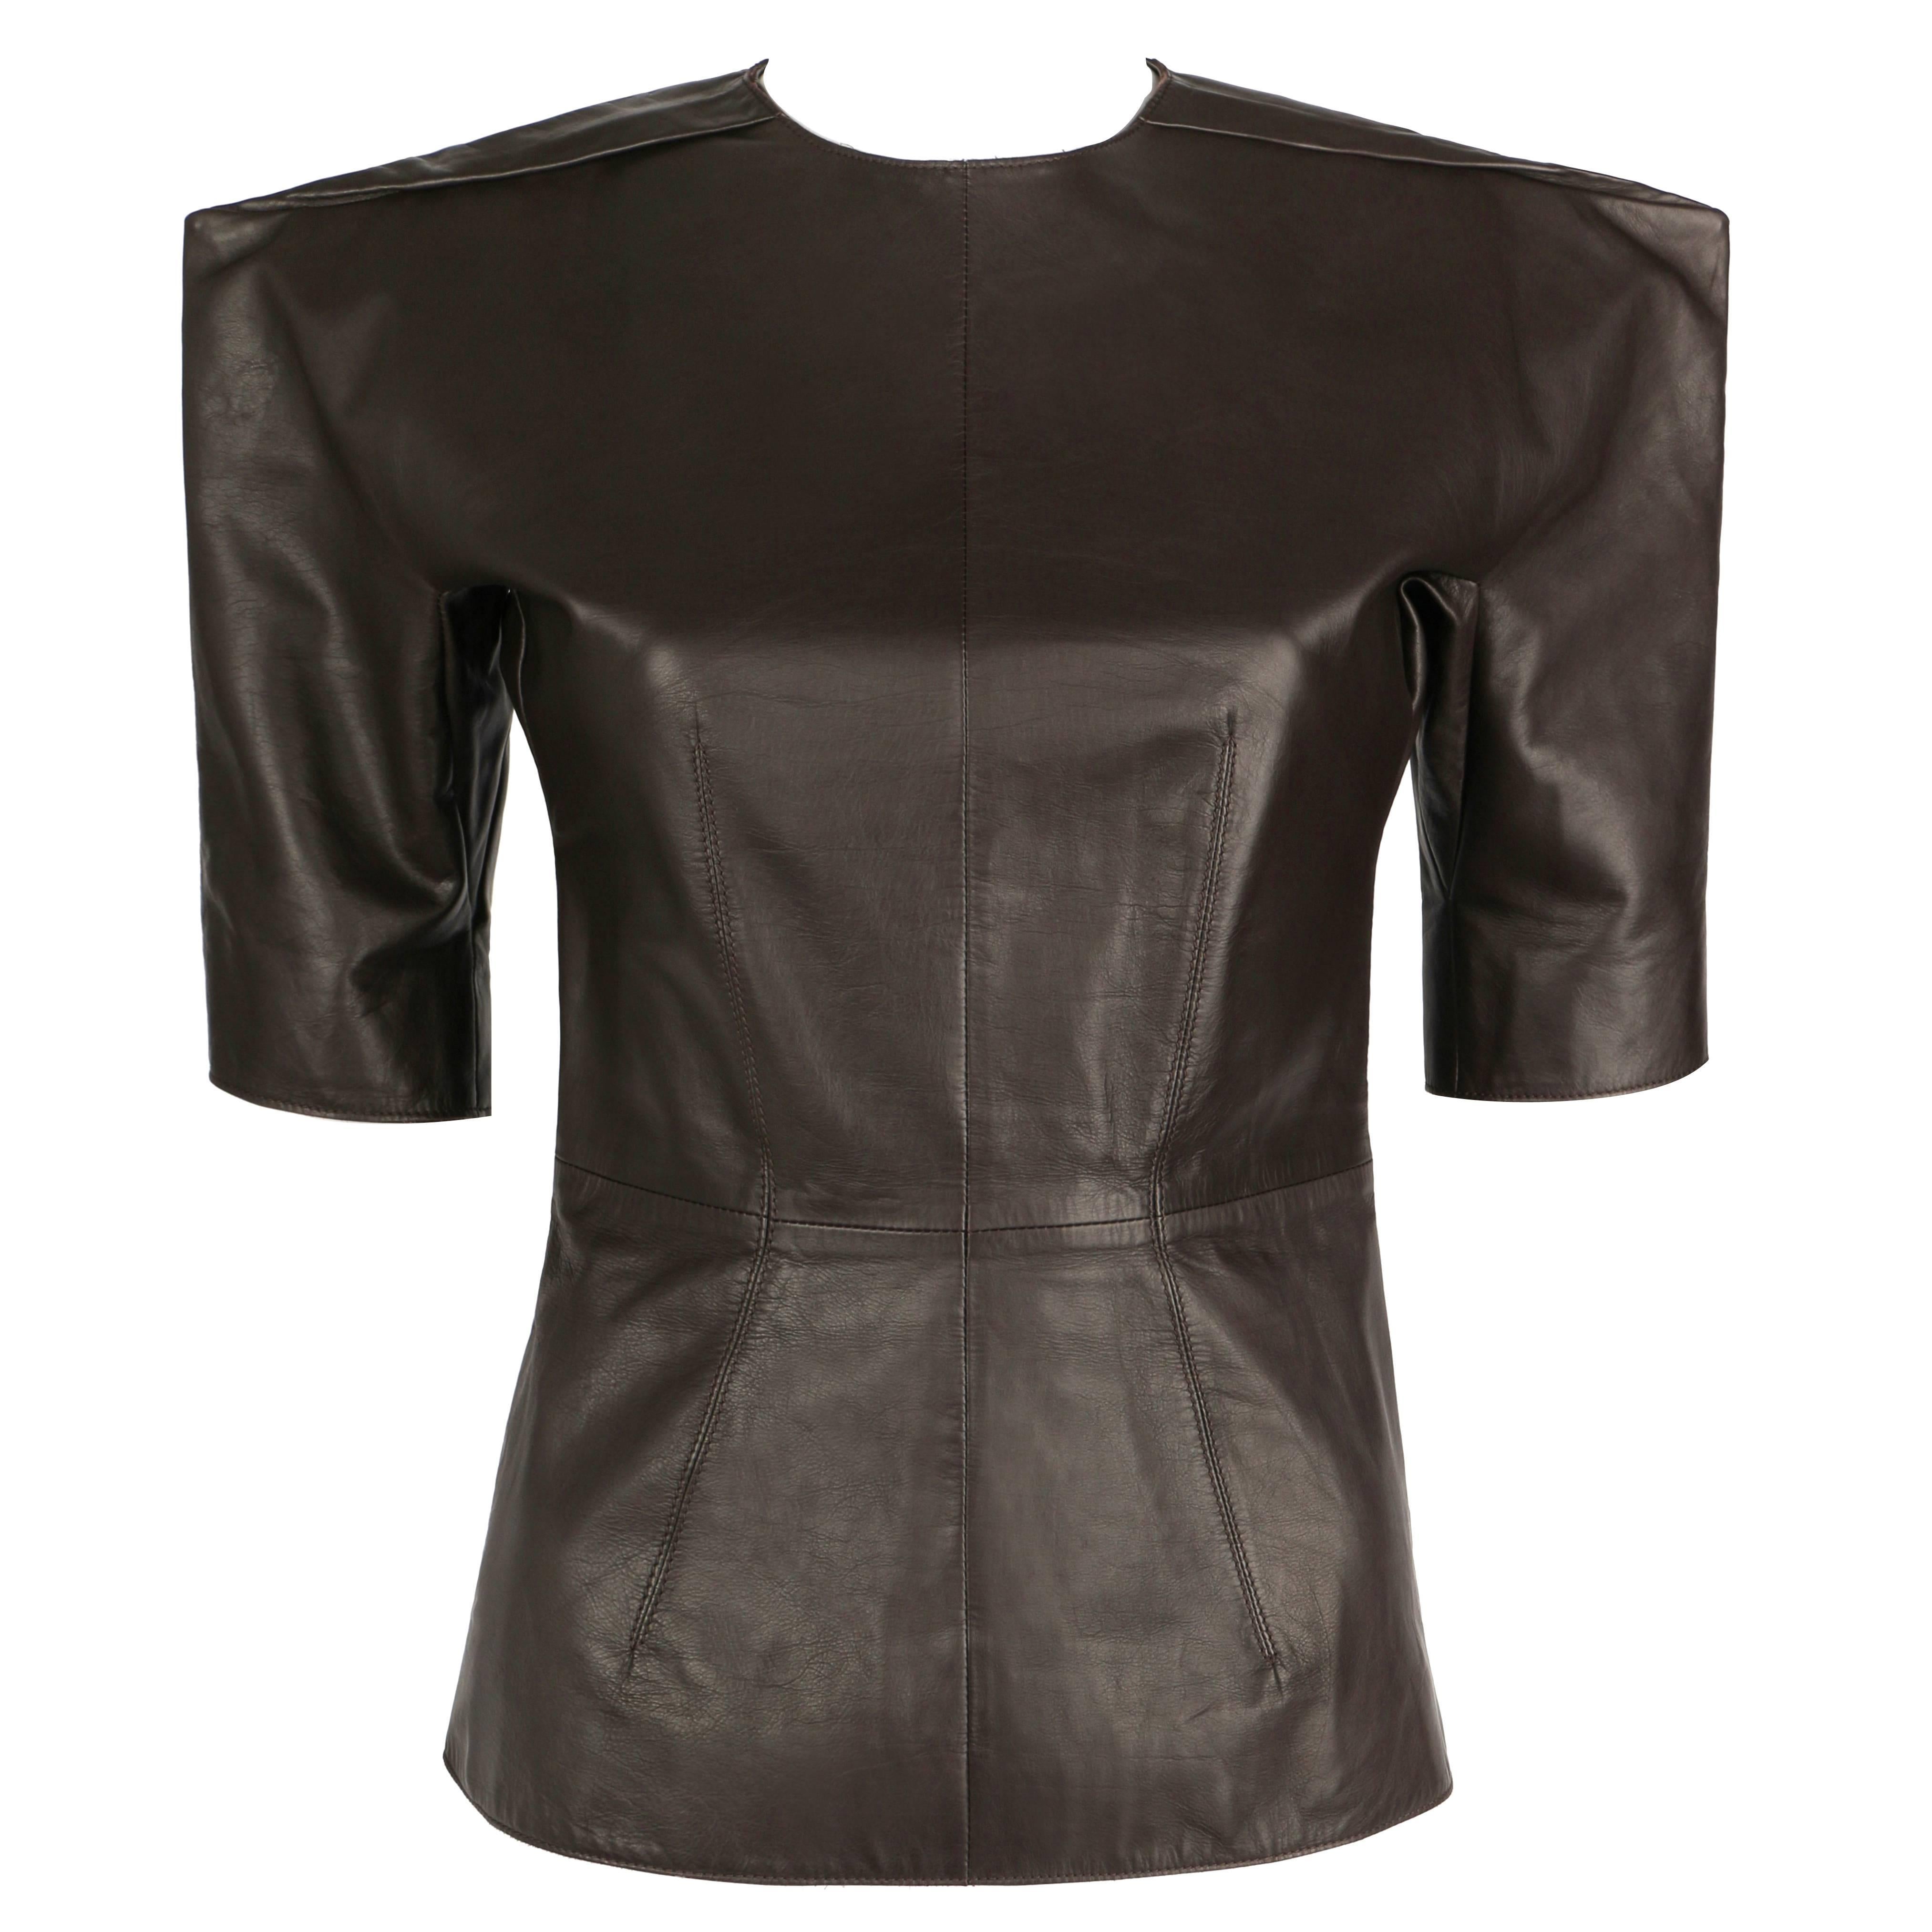 LANVIN F/W 2010 Runway Collection Dark Brown Calf Leather Shirt Structured Top